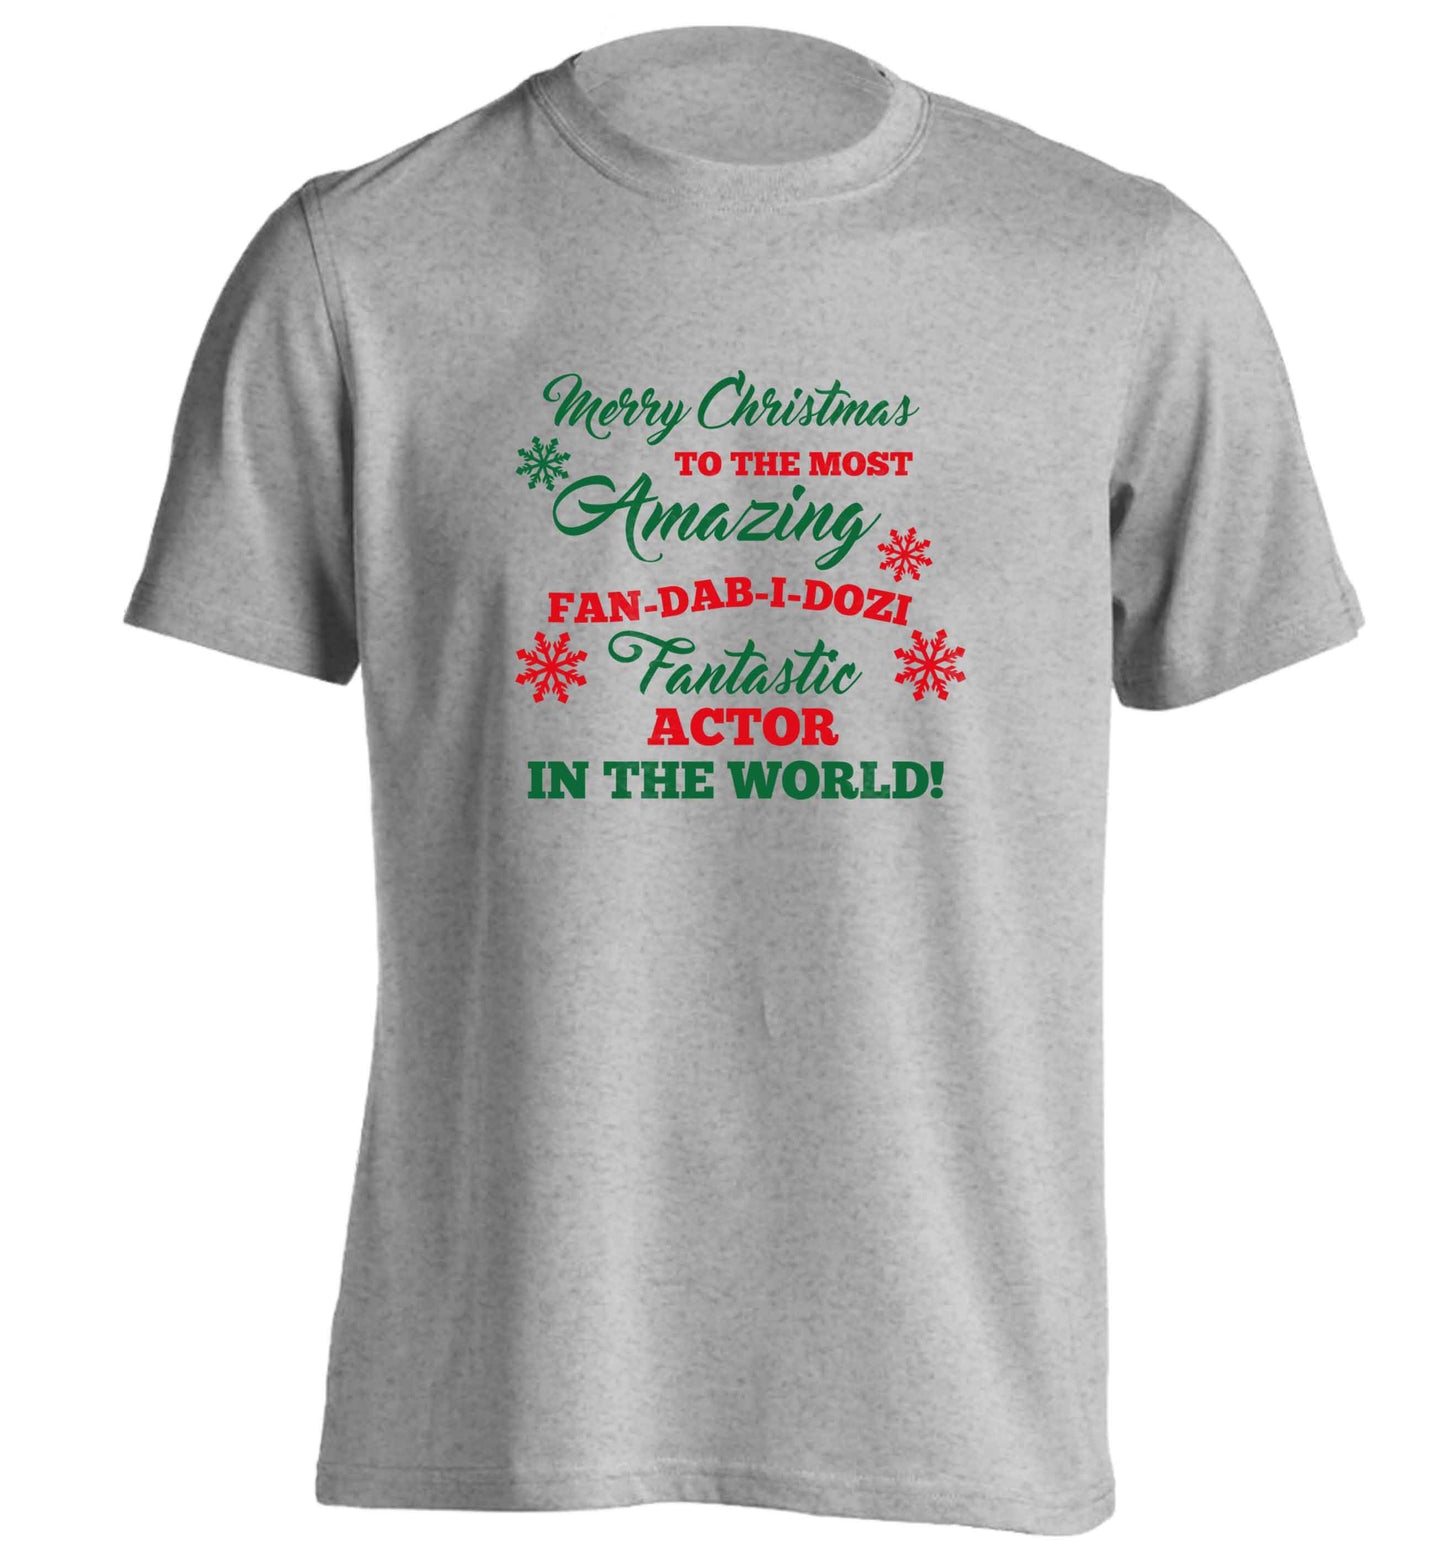 Merry Christmas to the most amazing actor in the world! adults unisex grey Tshirt 2XL